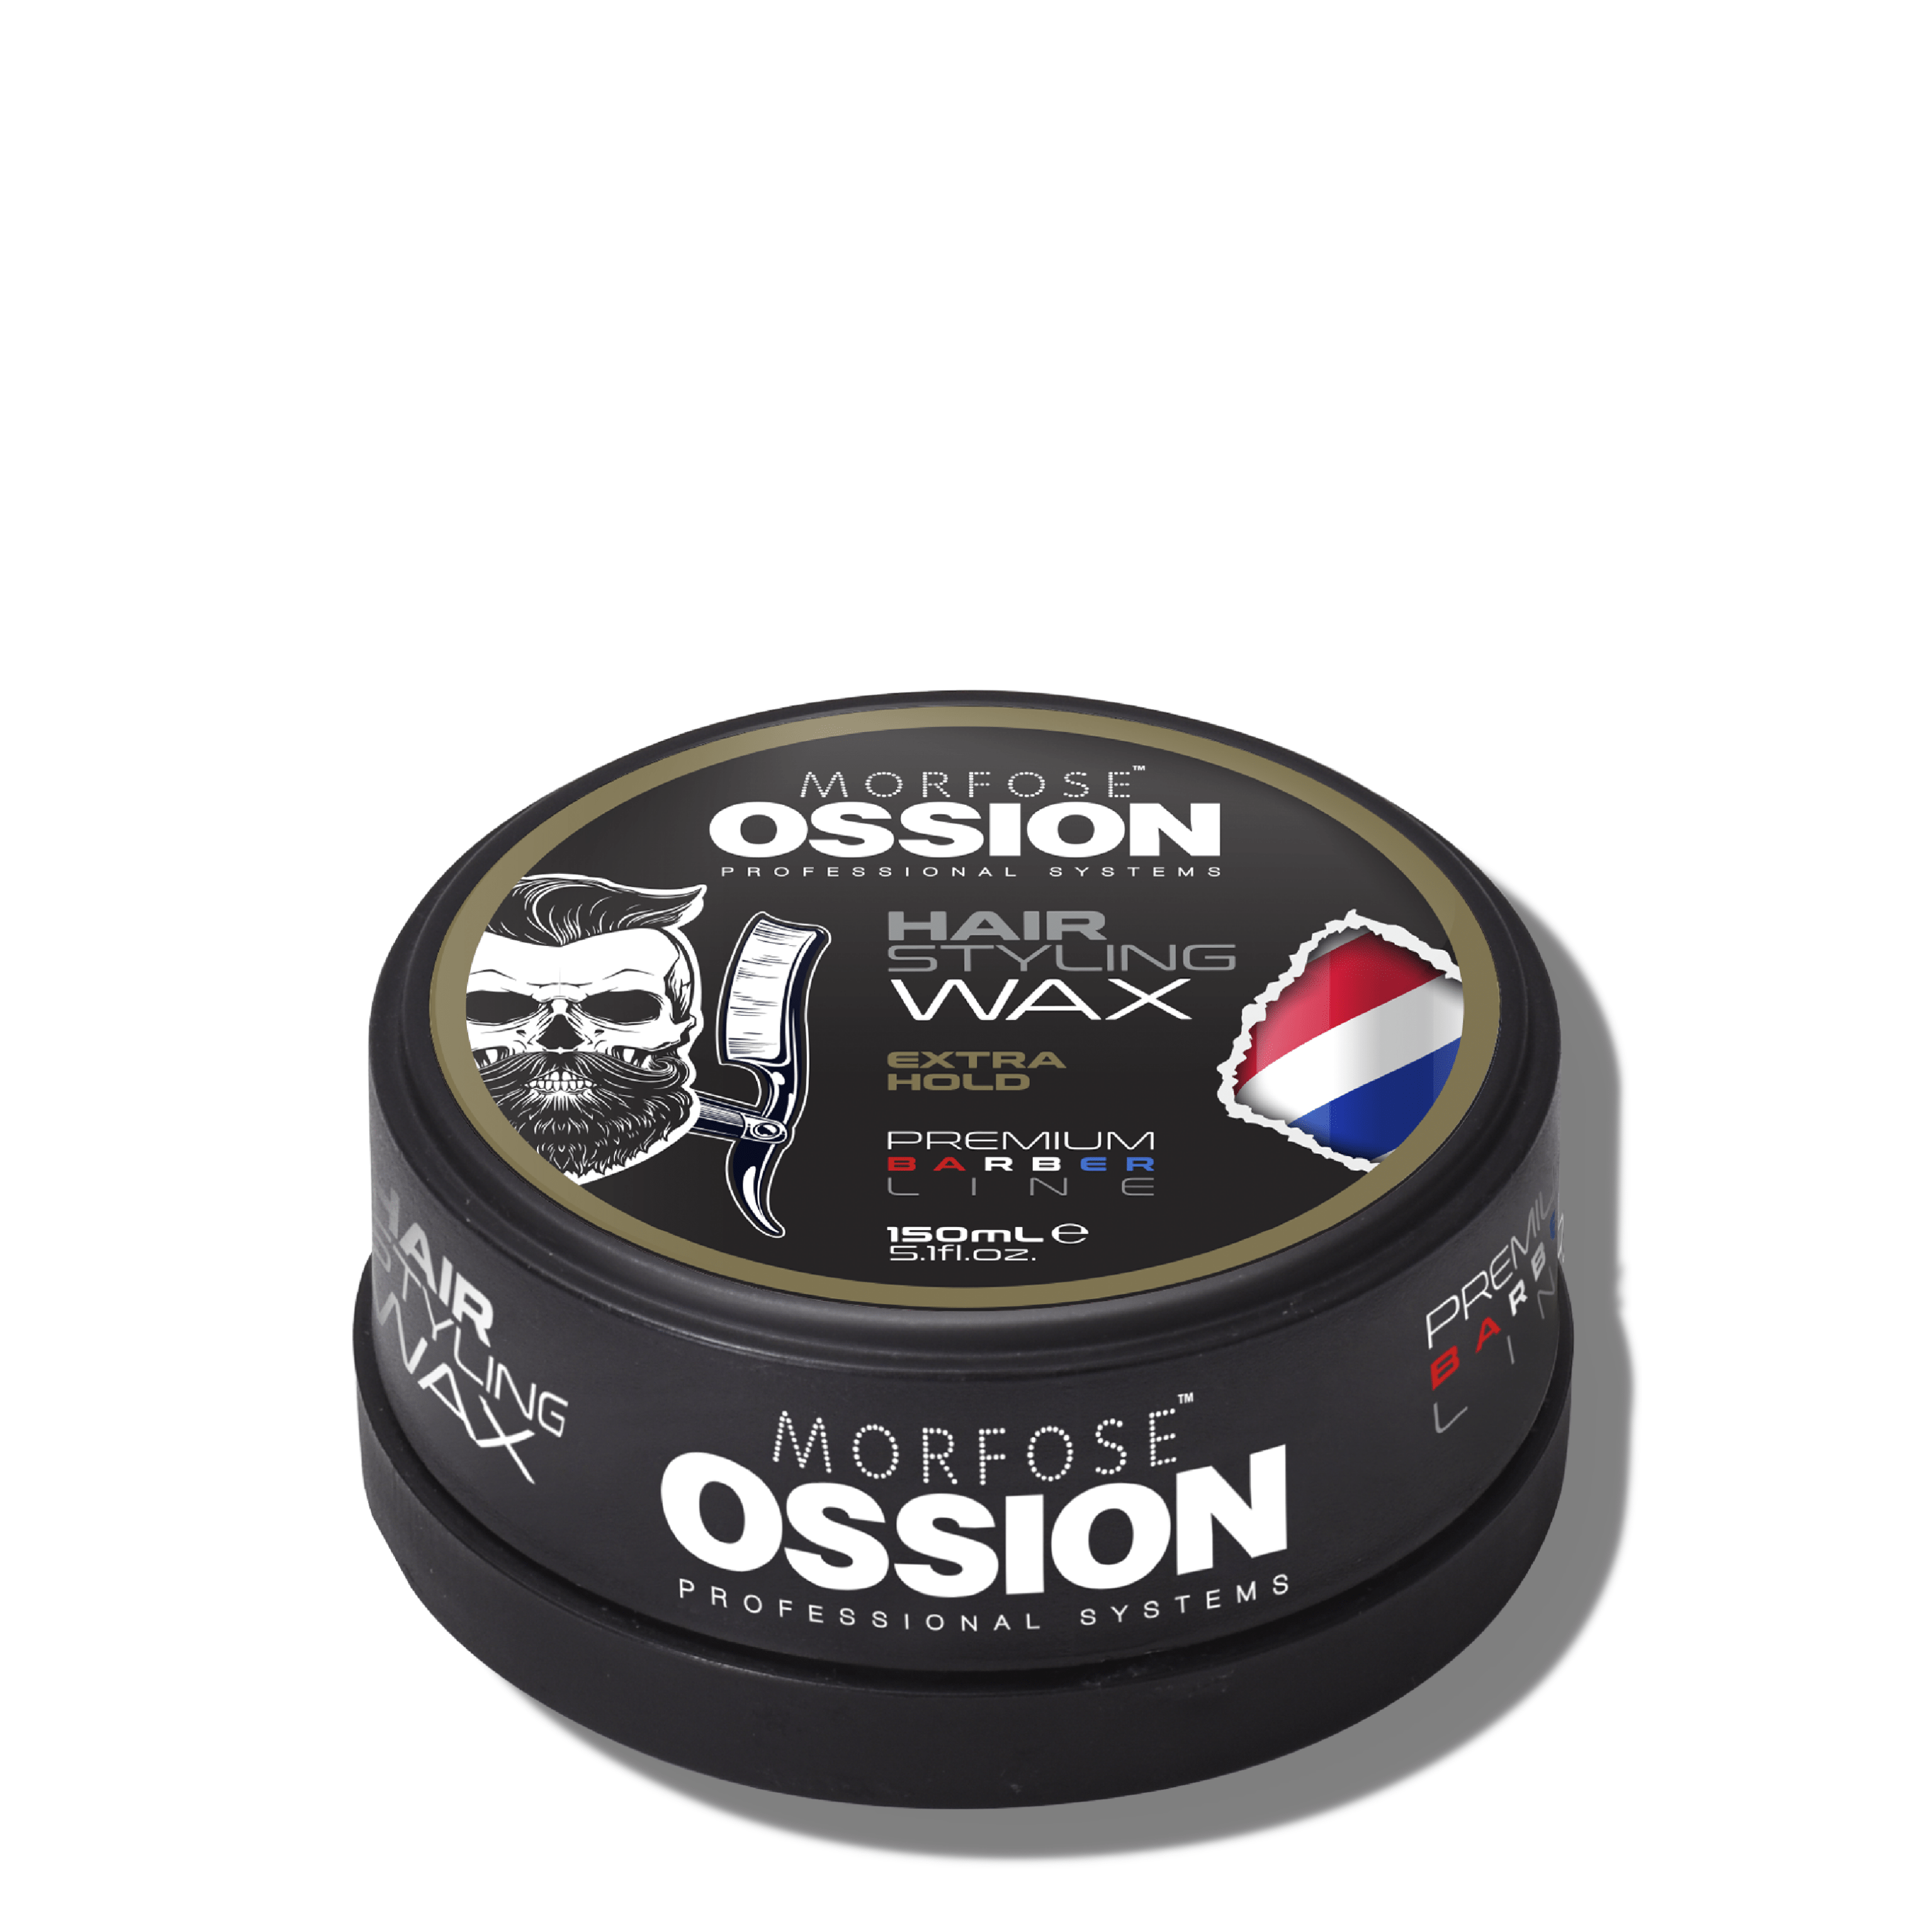 Morfose Ossion Premium Barber Extra Hold Hair Wax